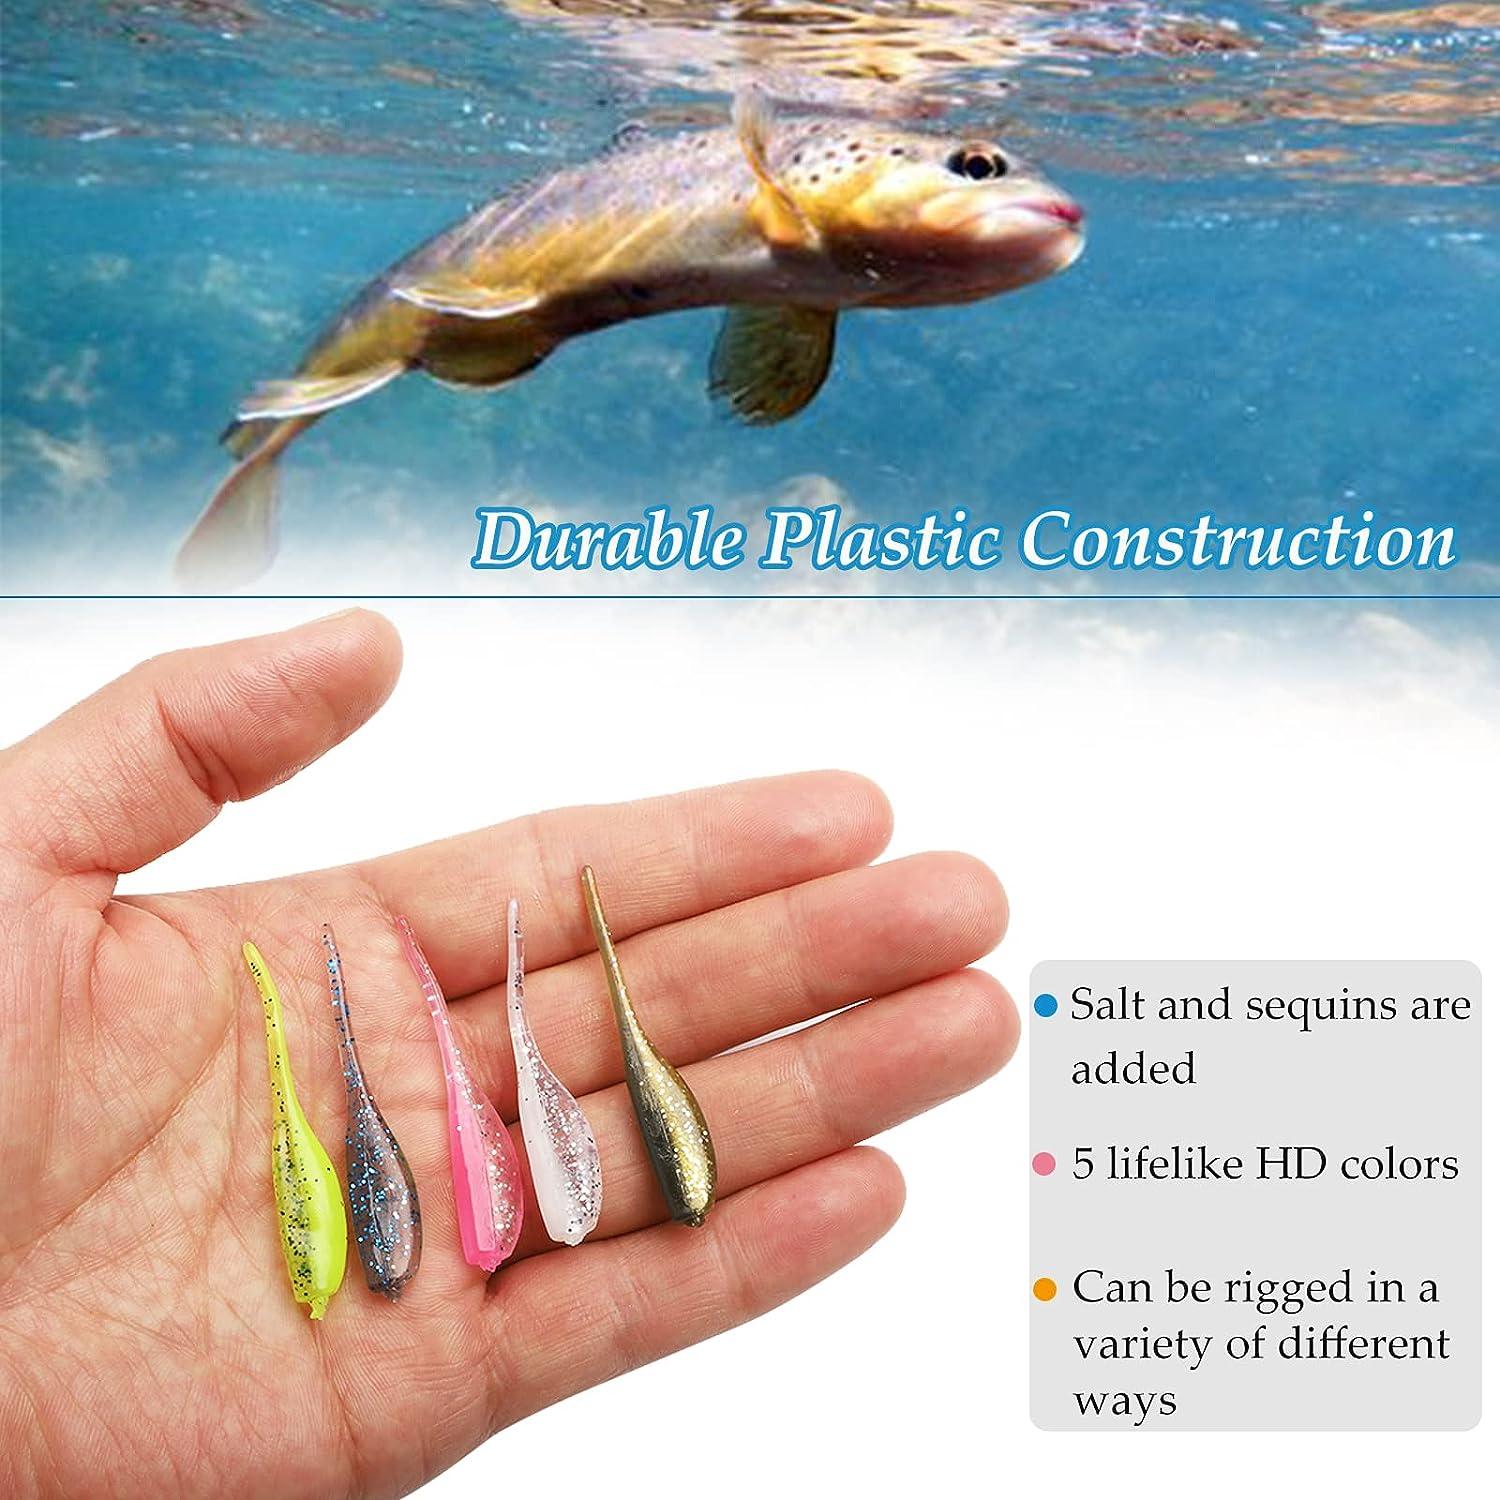  QualyQualy Soft Plastic Lures, 30pcs Paddle Tail